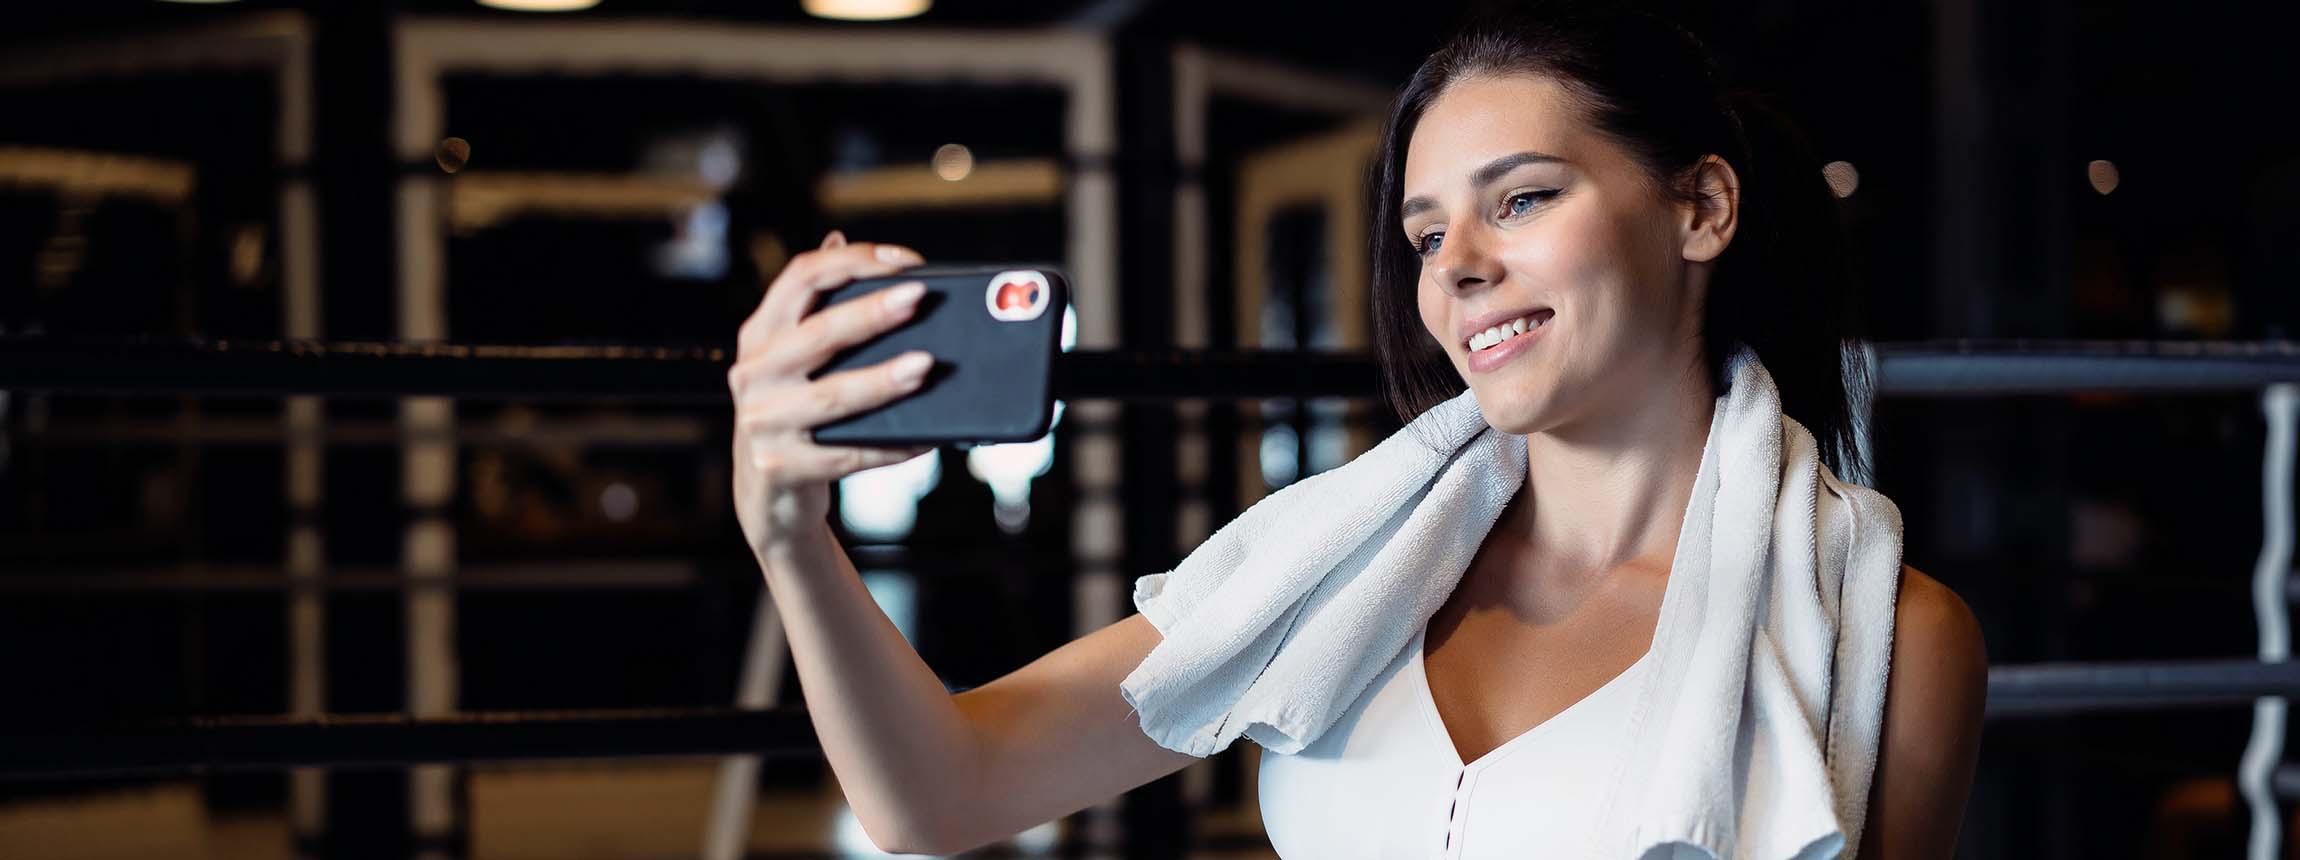 Sporty woman taking selfie with mobile phone social networks